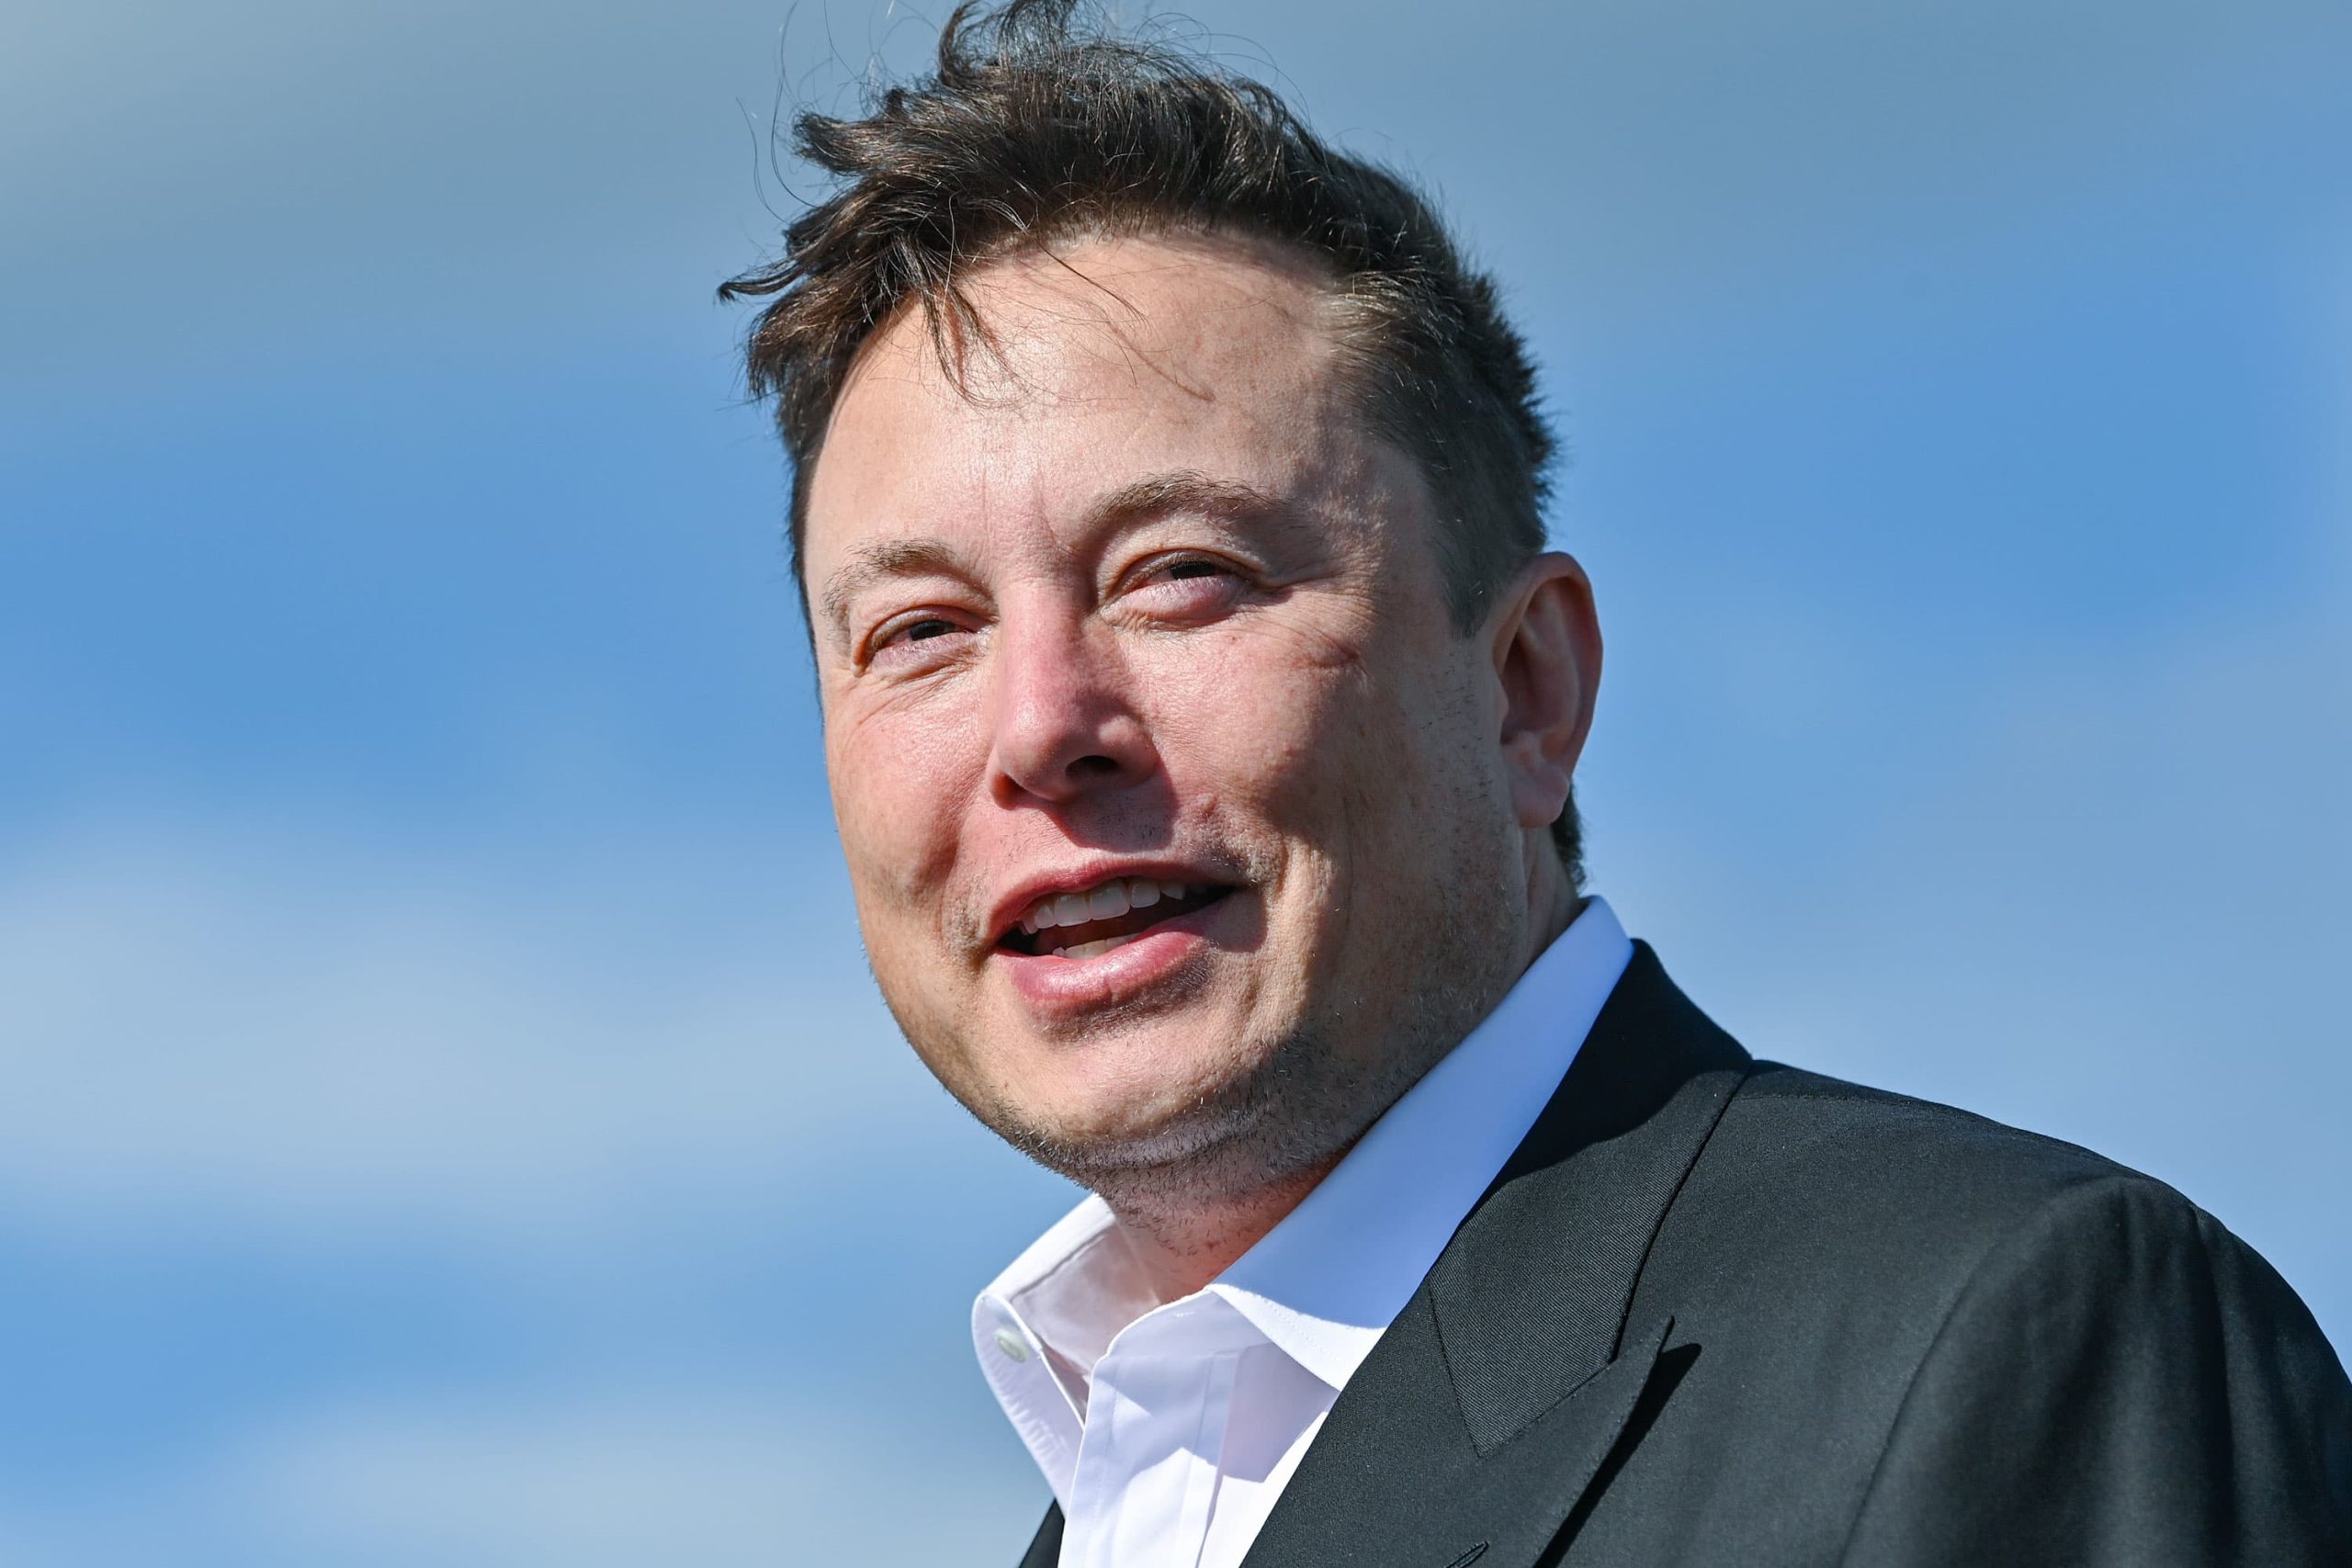 Elon Musk once again becomes world's richest man